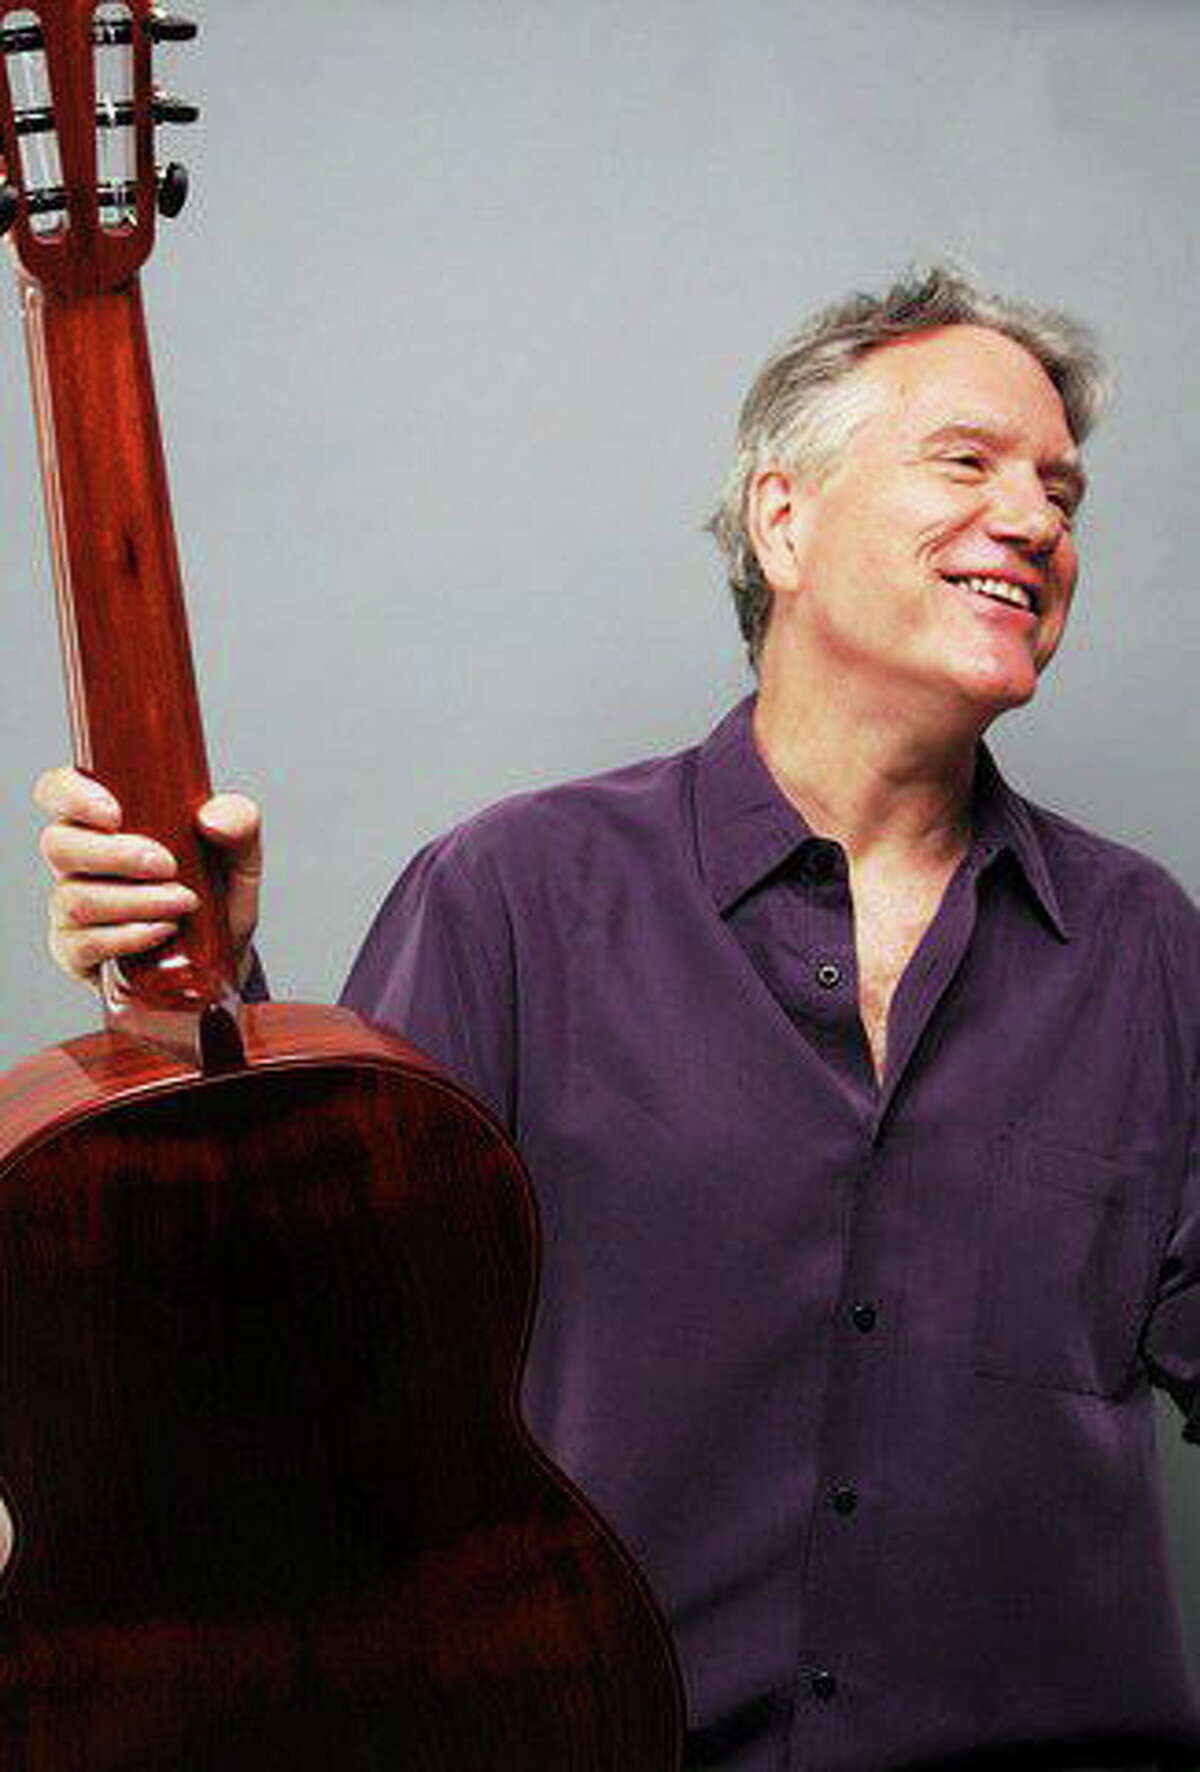 BAROQUE TO NOW: Renowned guitarist and Yale faculty member Benjamin Verdery, above, will helm the latest concert in the Yale School of Music’s Faculty Artist Series at 8 p.m. Jan 25. The program in Morse Recital Hall at Sprague Hall, 470 College St. in New Haven, will include selections by Baroque great J.S. Bach and 20th-century composer Manuel de Falla, in addition to modern works by Yale faculty members David Lang, Ingram Marshall and Christopher Theofanidis. Verdery’s wife, flutist Rie Schmidt, will also perform.